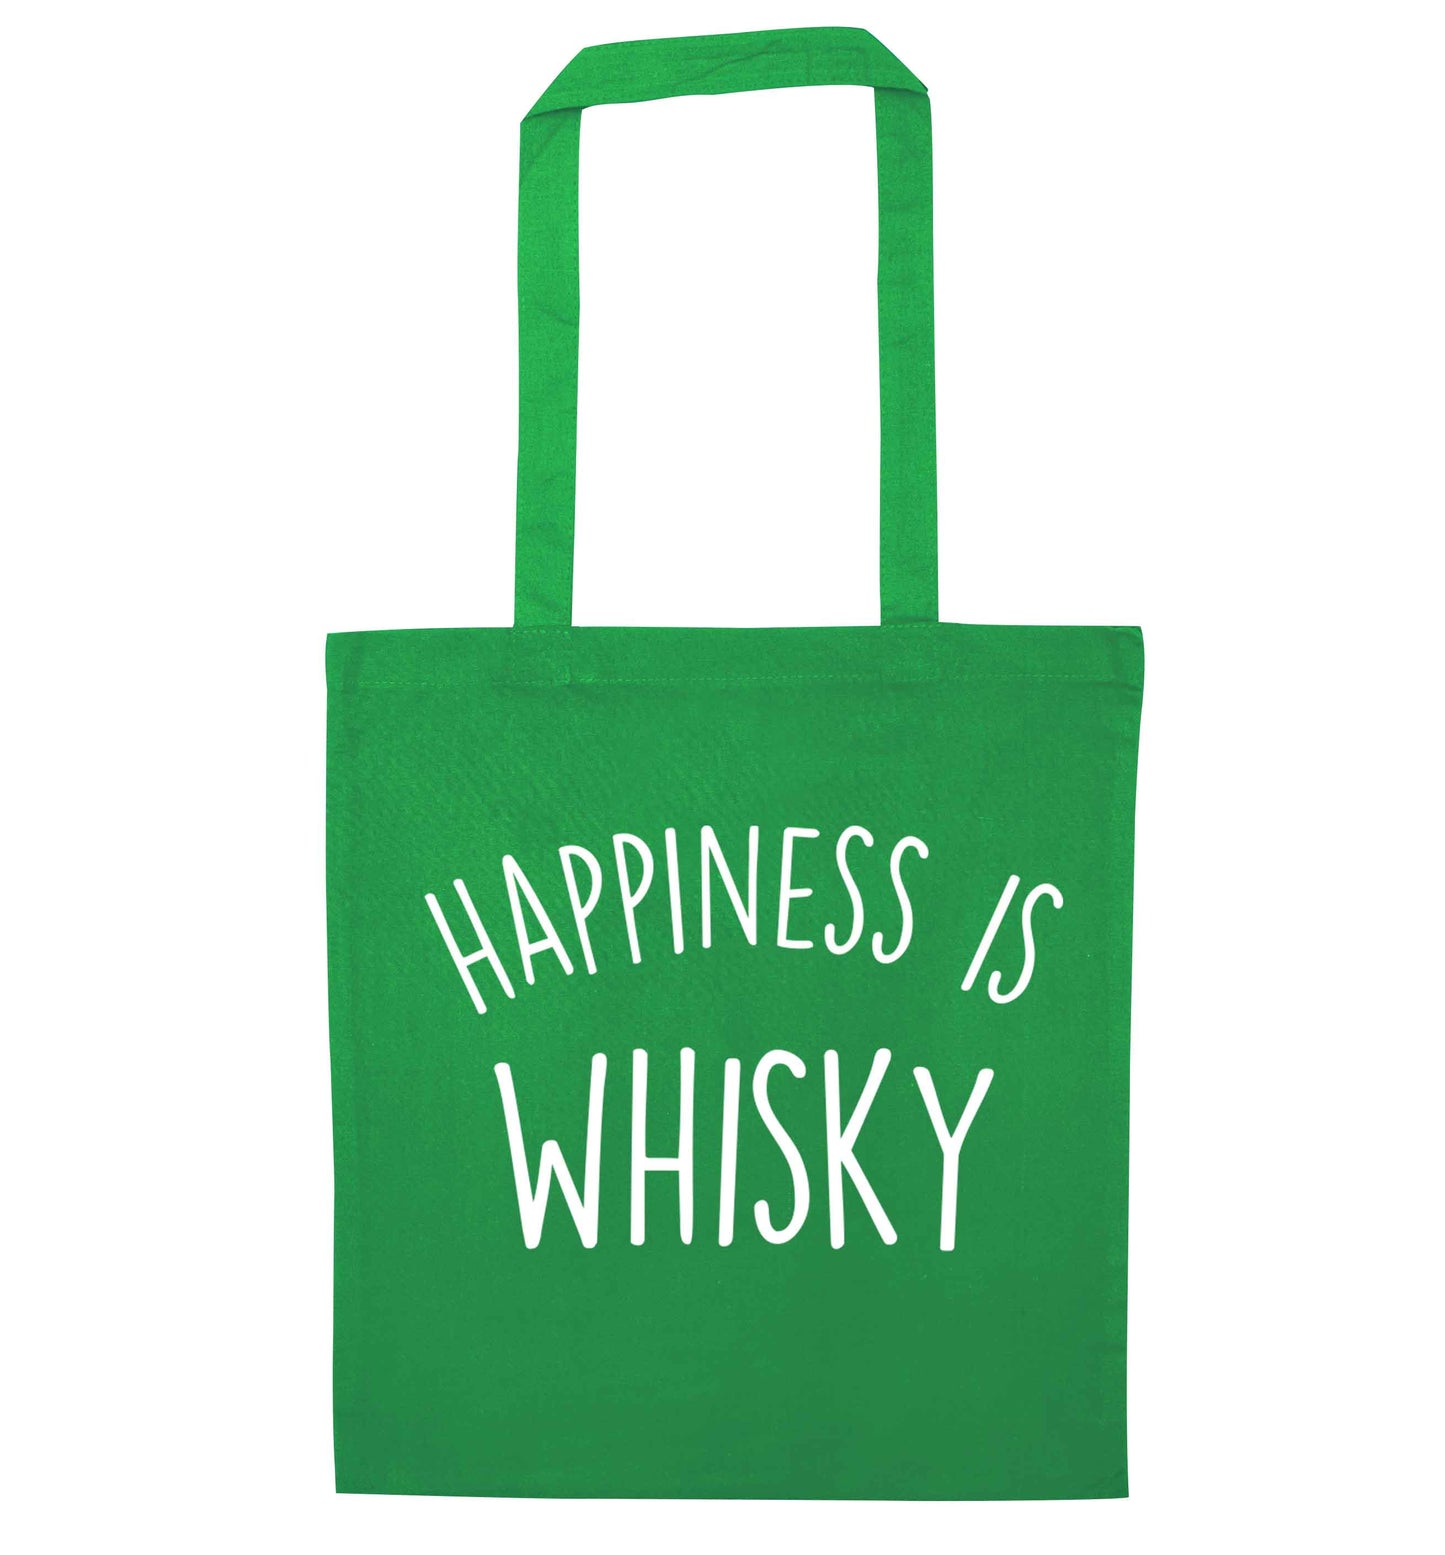 Happiness is whisky green tote bag